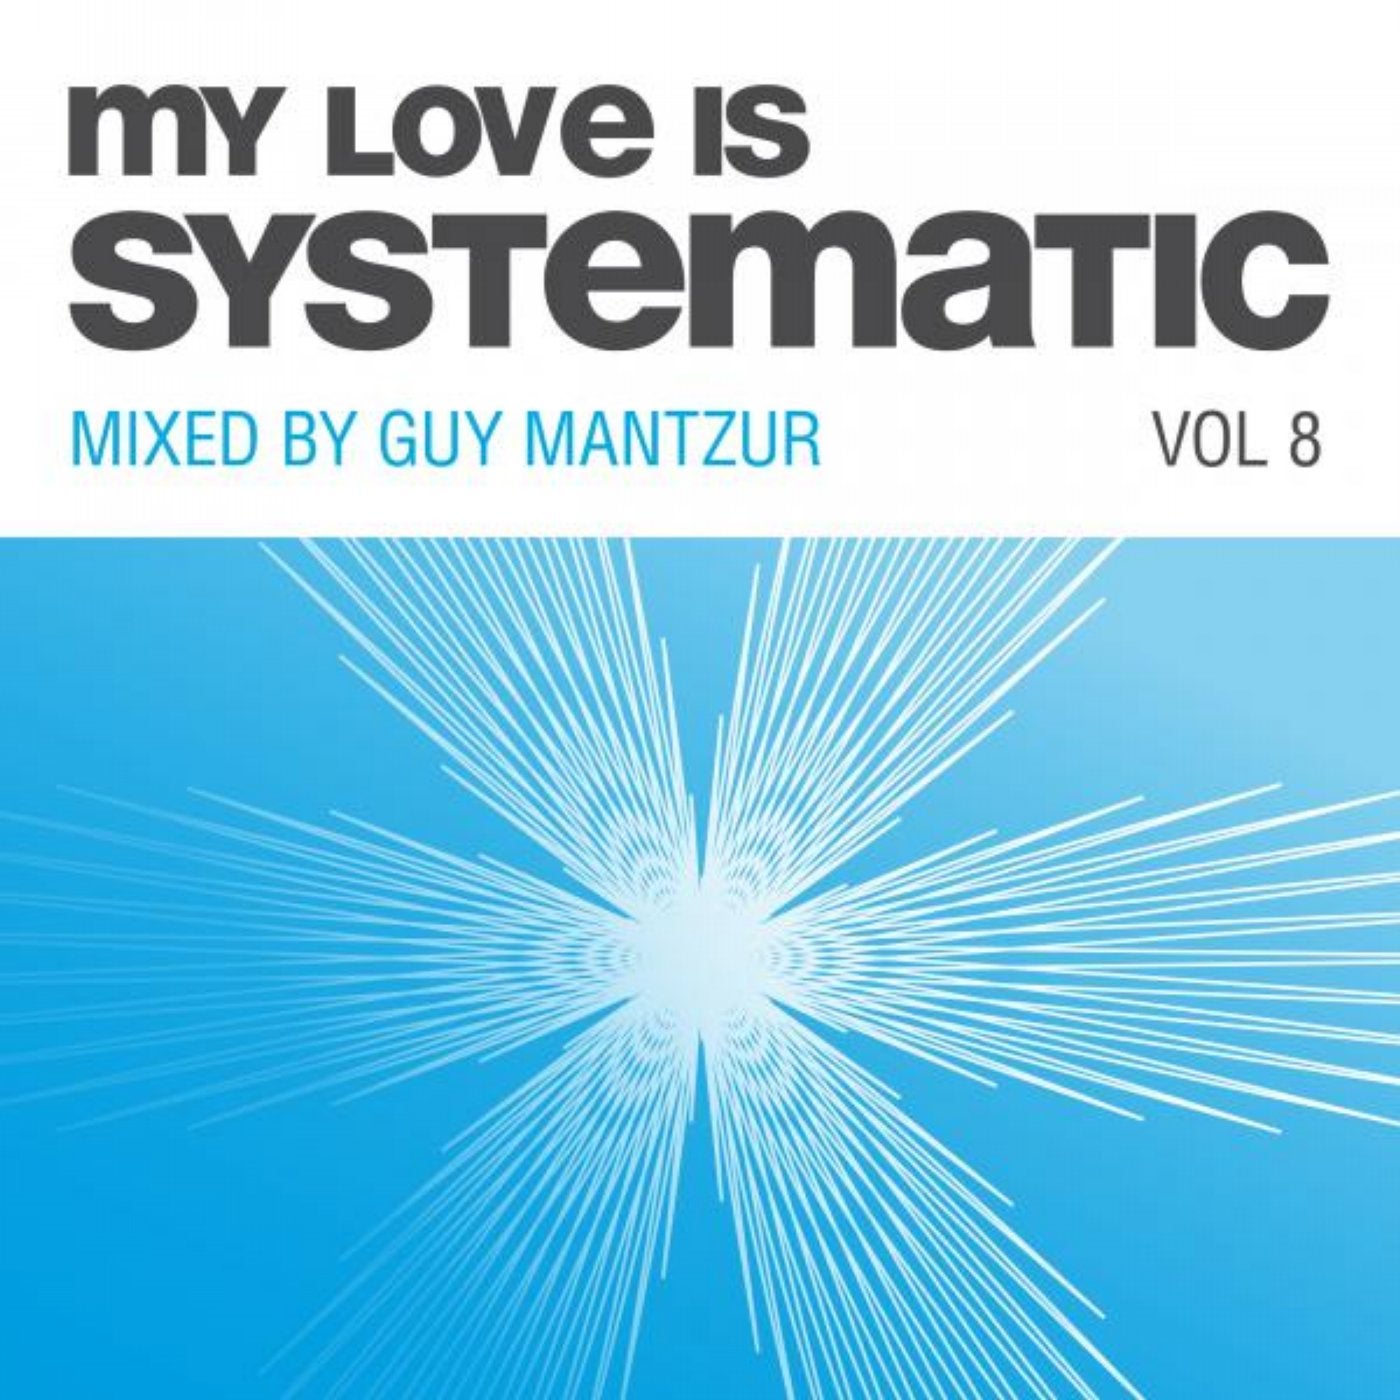 My Love Is Systematic, Vol. 8 (Compiled and Mixed by Guy Mantzur)